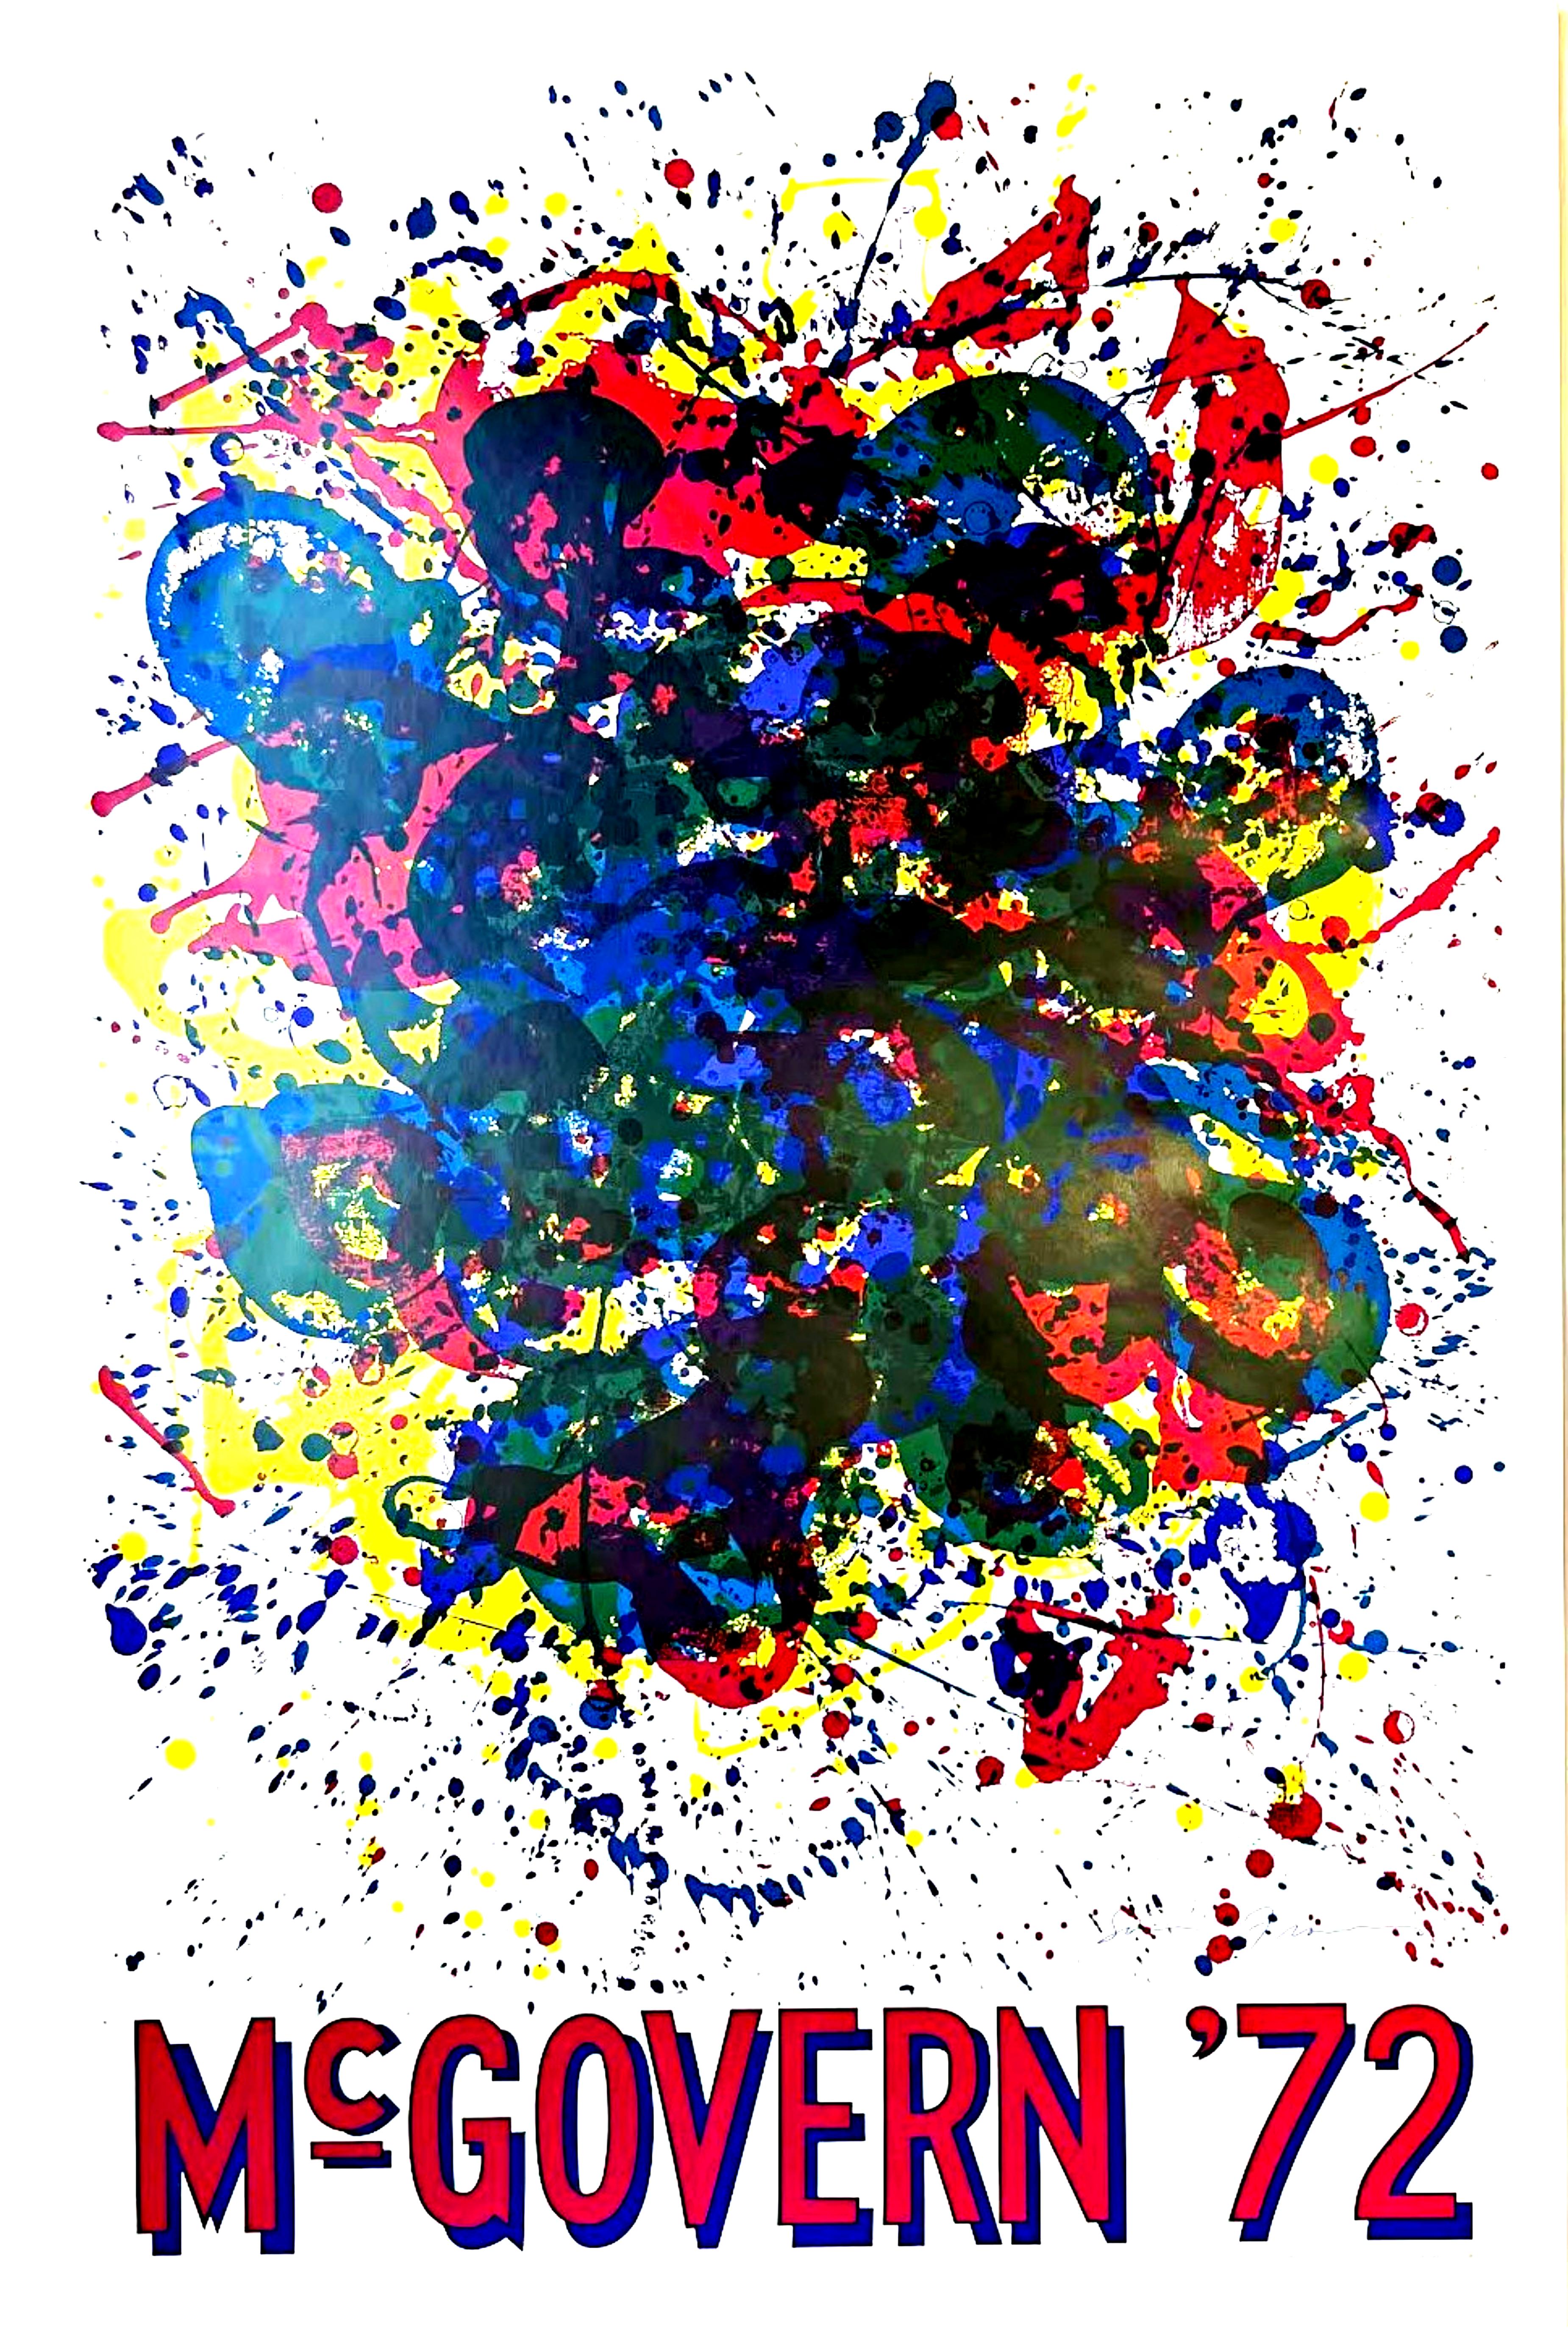 Sam Francis McGovern '72 Poster (Hand signed by Sam Francis) Abstract lithograph